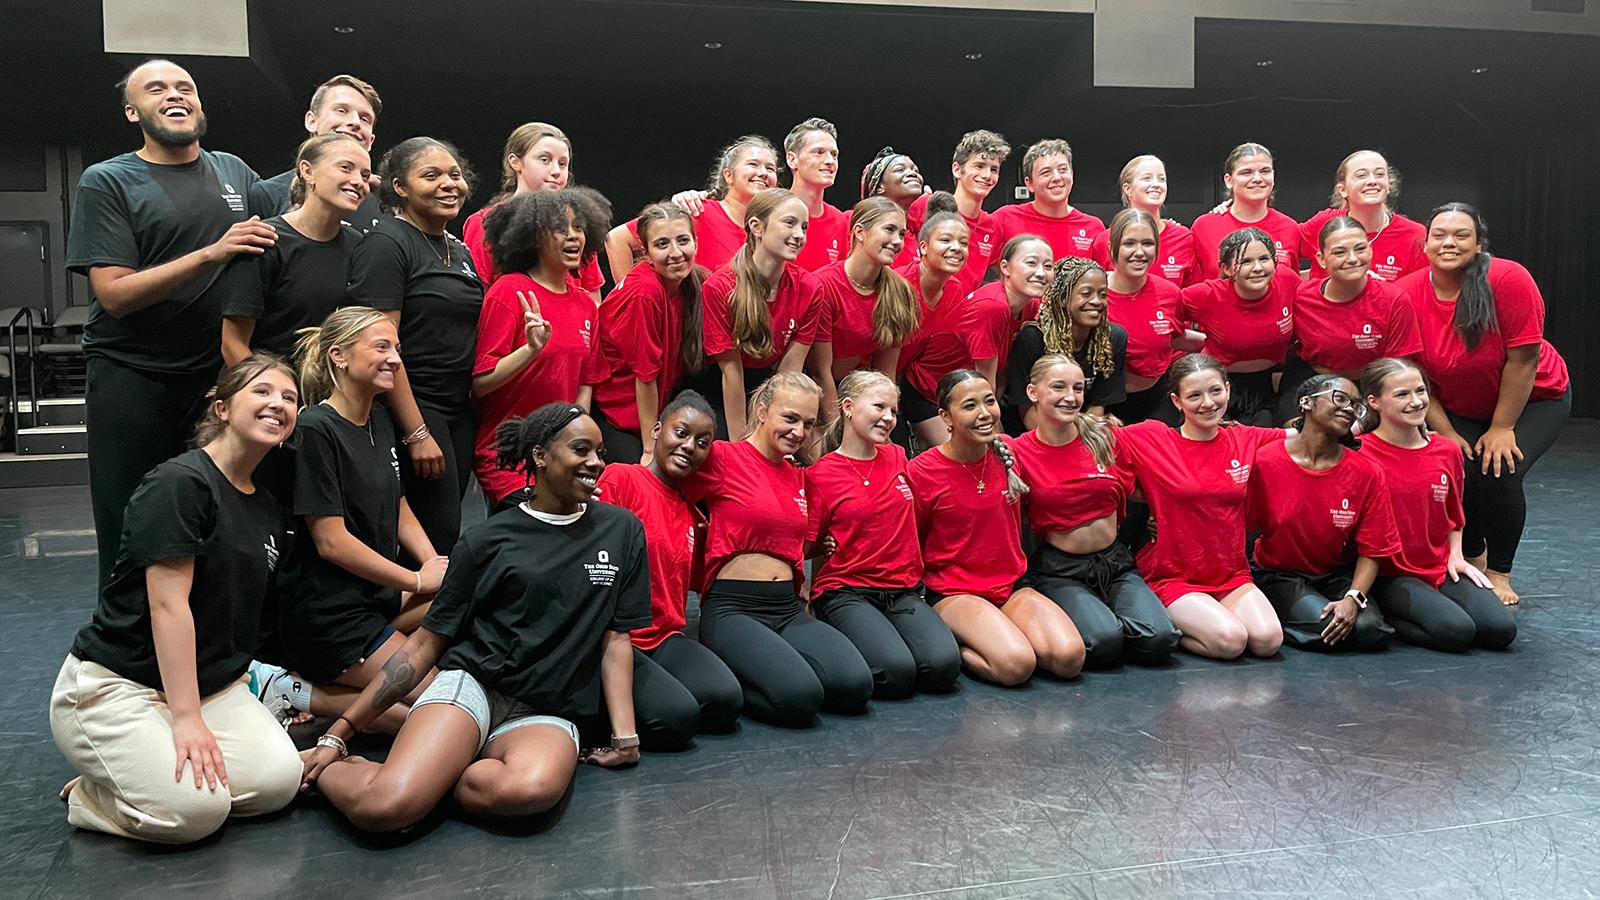 Group photo of dancers in black and red t-shirts 